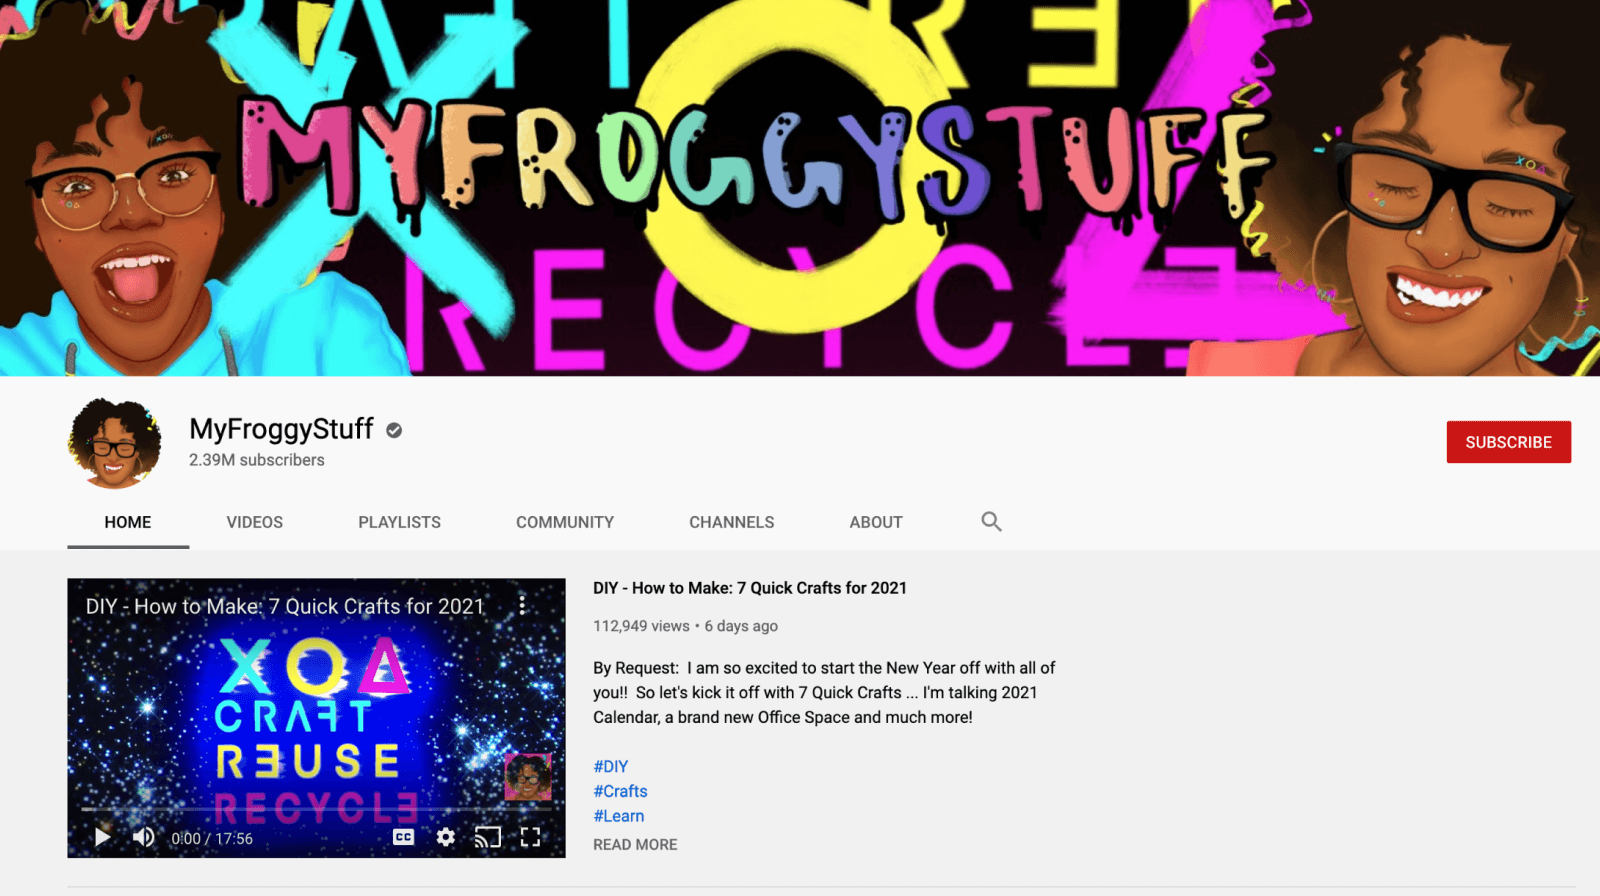 Discover YouTube Channel Ideas - Get Inspired by MyFroggyStuff